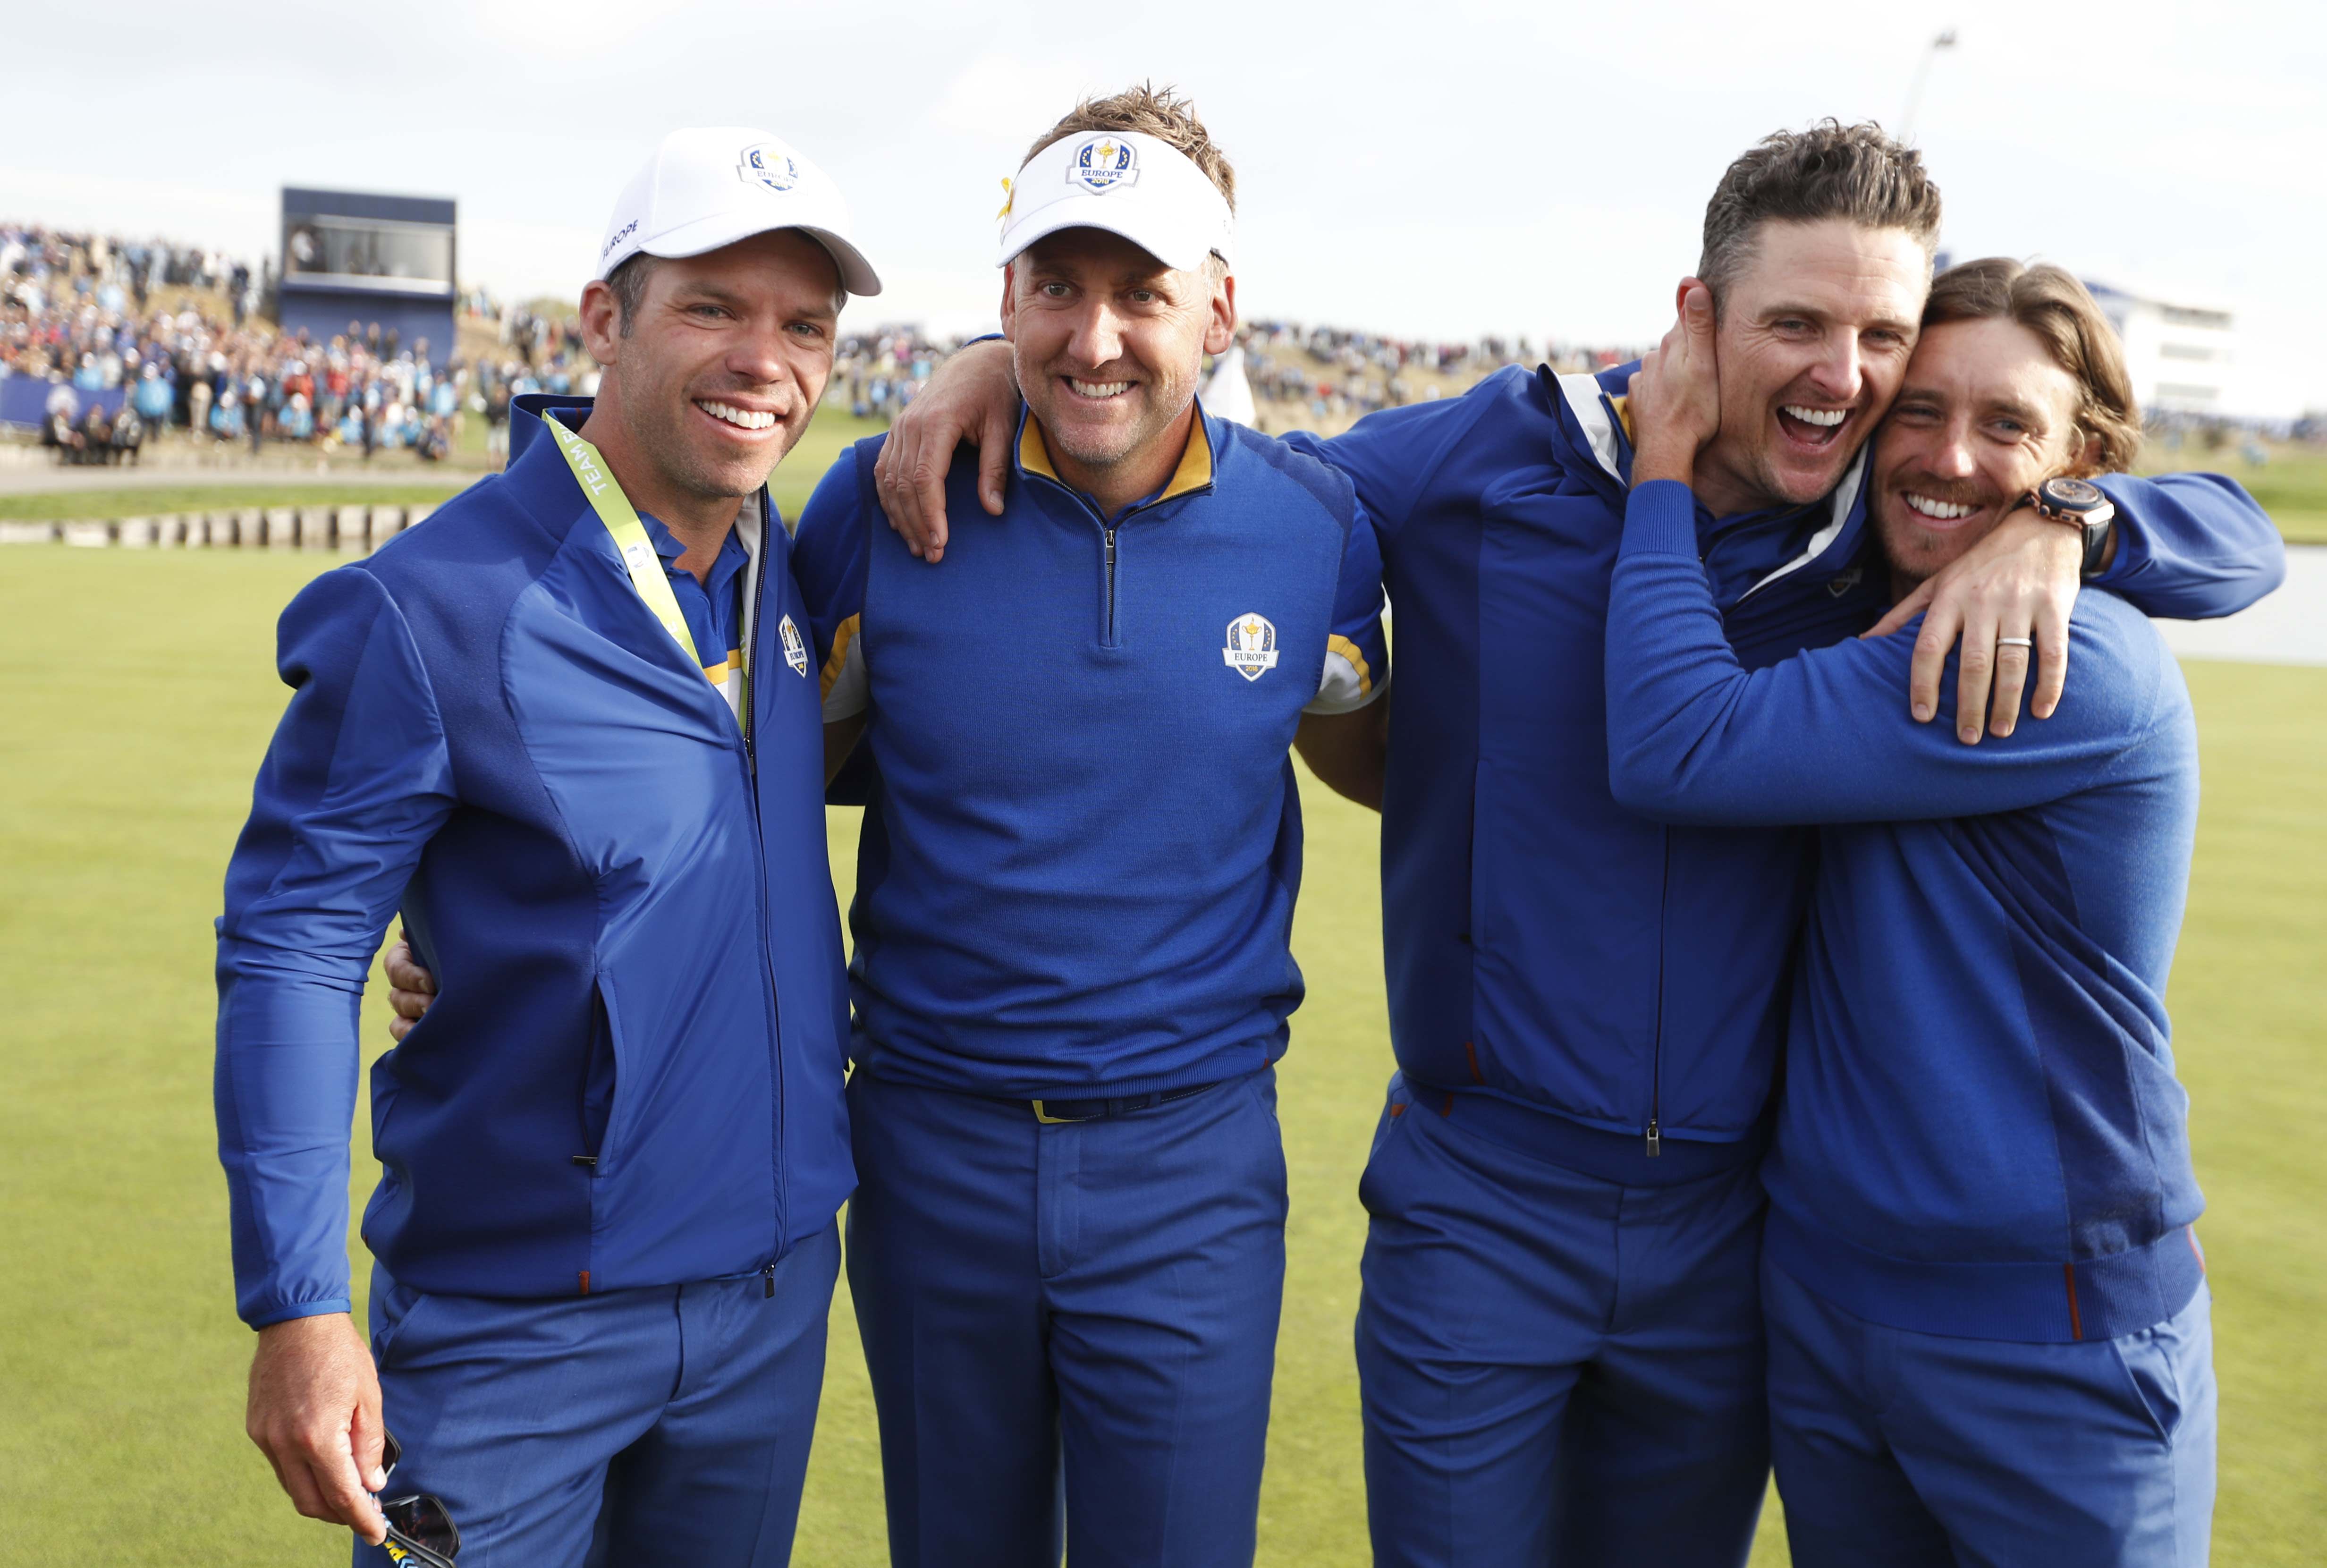 Golf: Europe beat United States to regain Ryder Cup